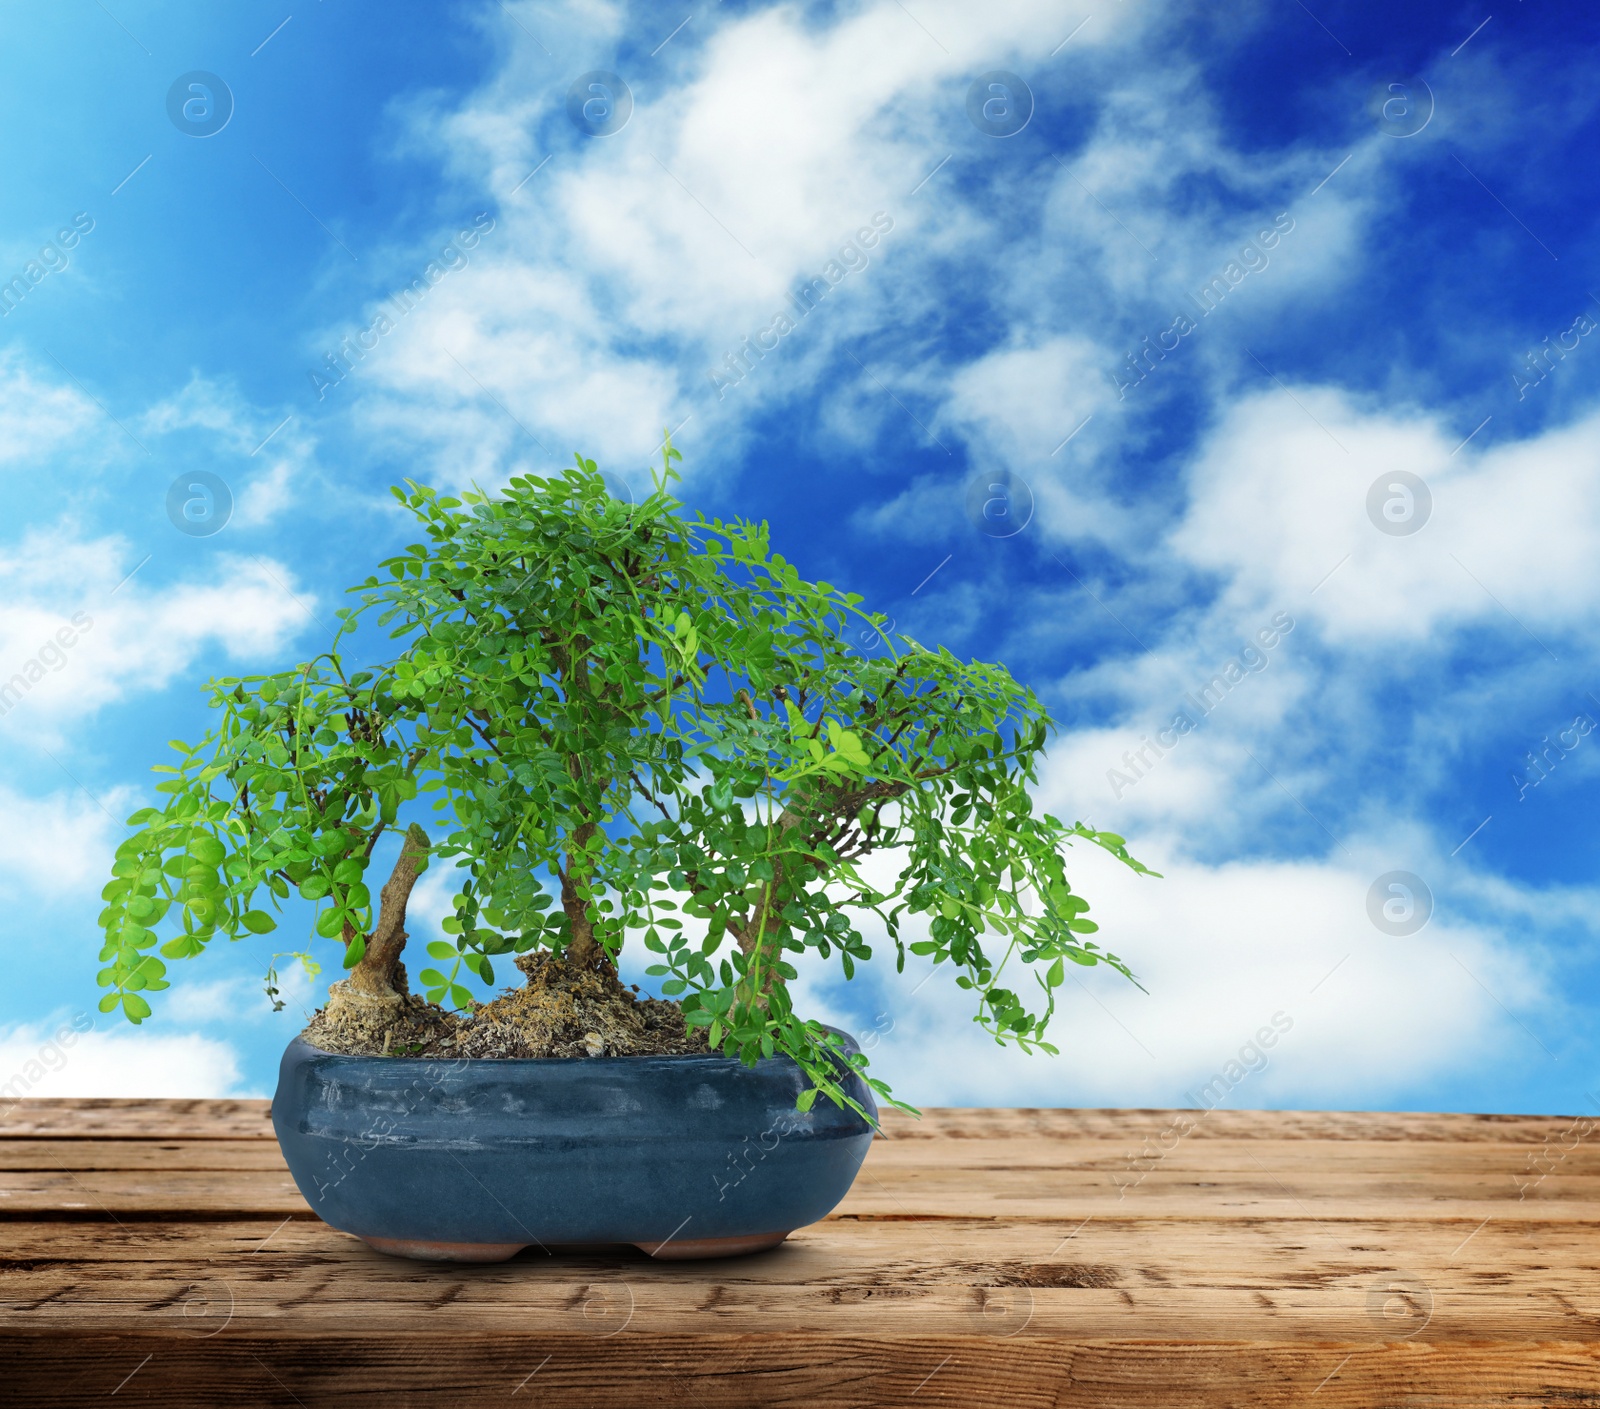 Image of Beautiful bonsai tree in pot on wooden table against blue sky